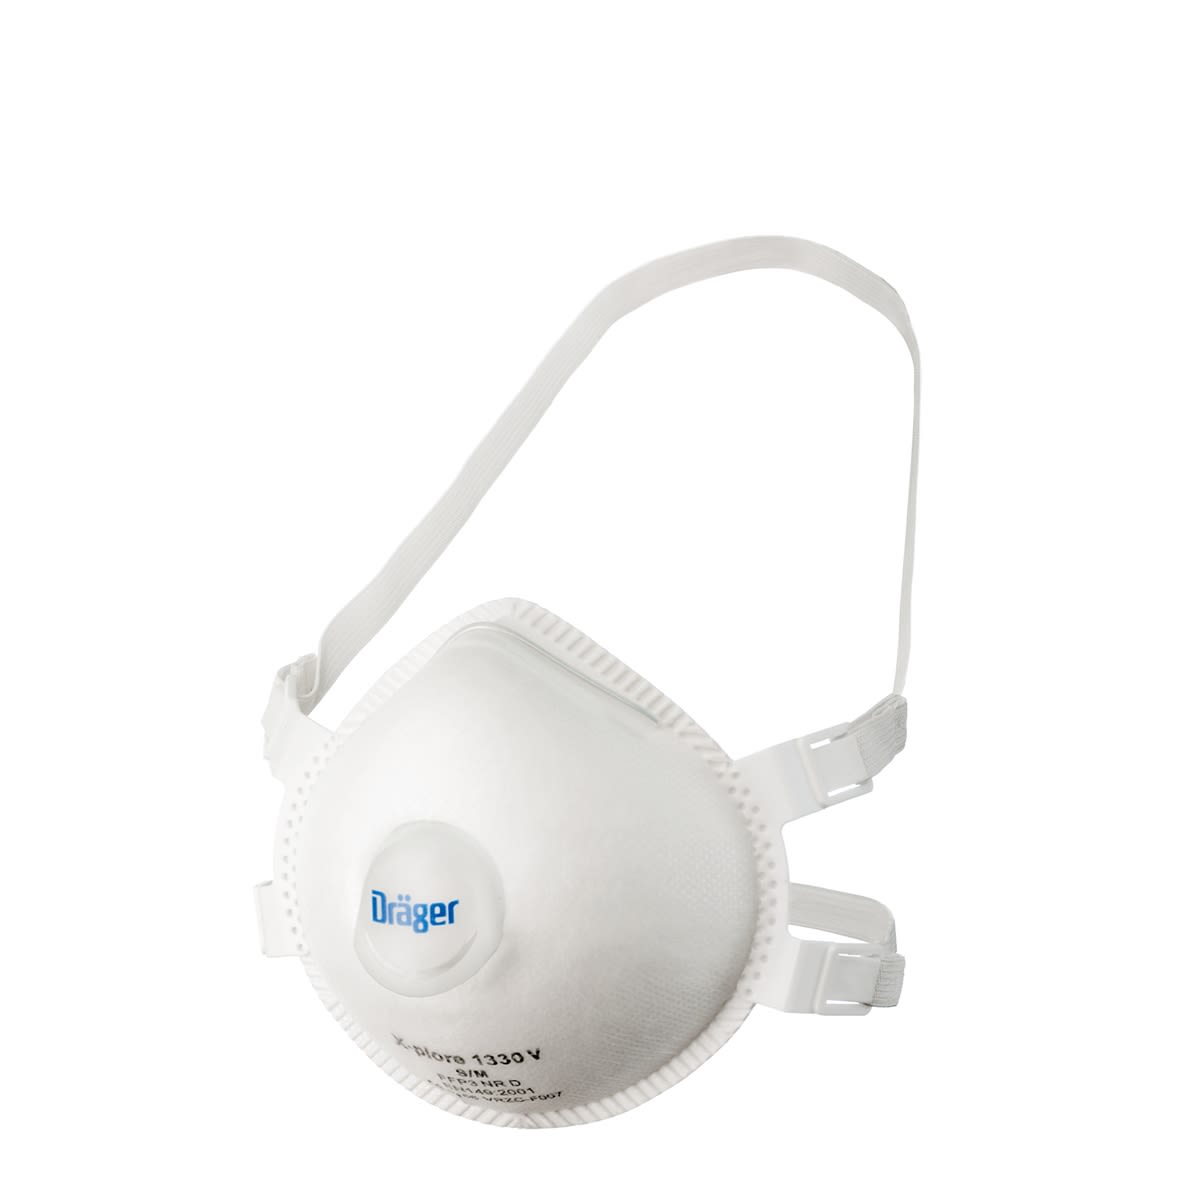 DRAEGER X-plore 1300 Series Disposable Respirator, FFP3, Valved, Moulded